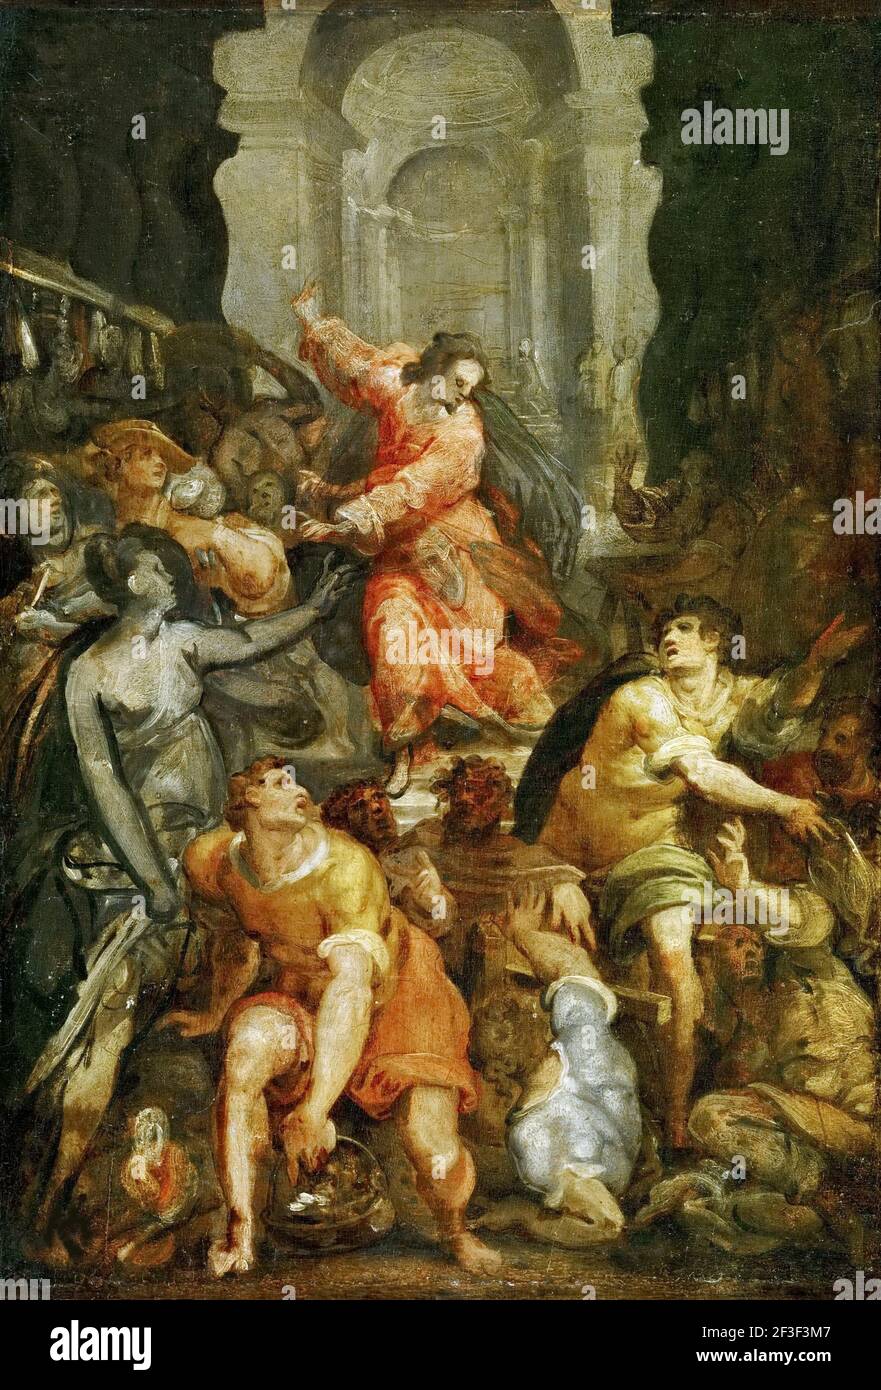 Christ Driving the Money Changers from the Temple, ca 1588. Found in the collection of Art History Museum, Vienne. Stock Photo